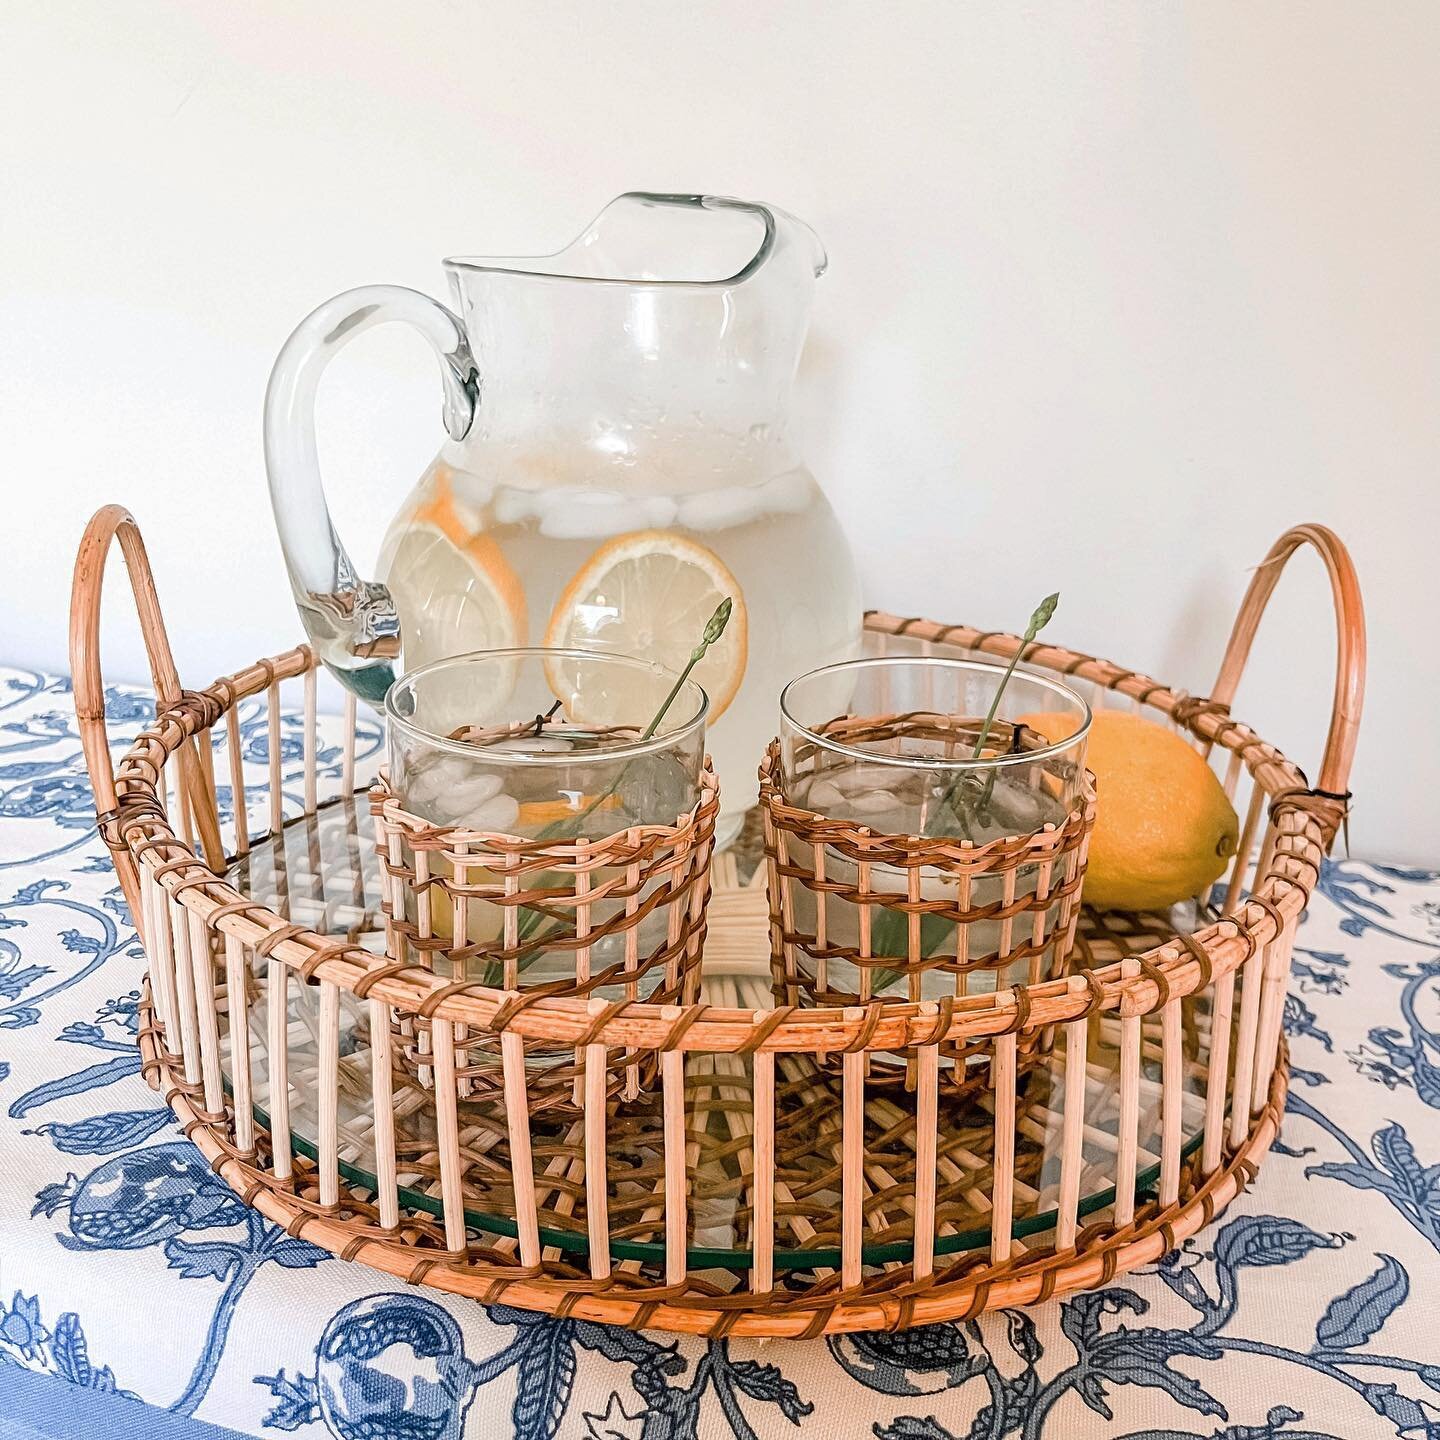 A beautiful serving tray and glasses for whatever beverage strikes your fancy! Also&hellip;aren&rsquo;t these French linens perfect?

#beverage #servingtrays #afternoondrinks #cheers #wine #shopsmall #shoplocal #thearrangementpdx